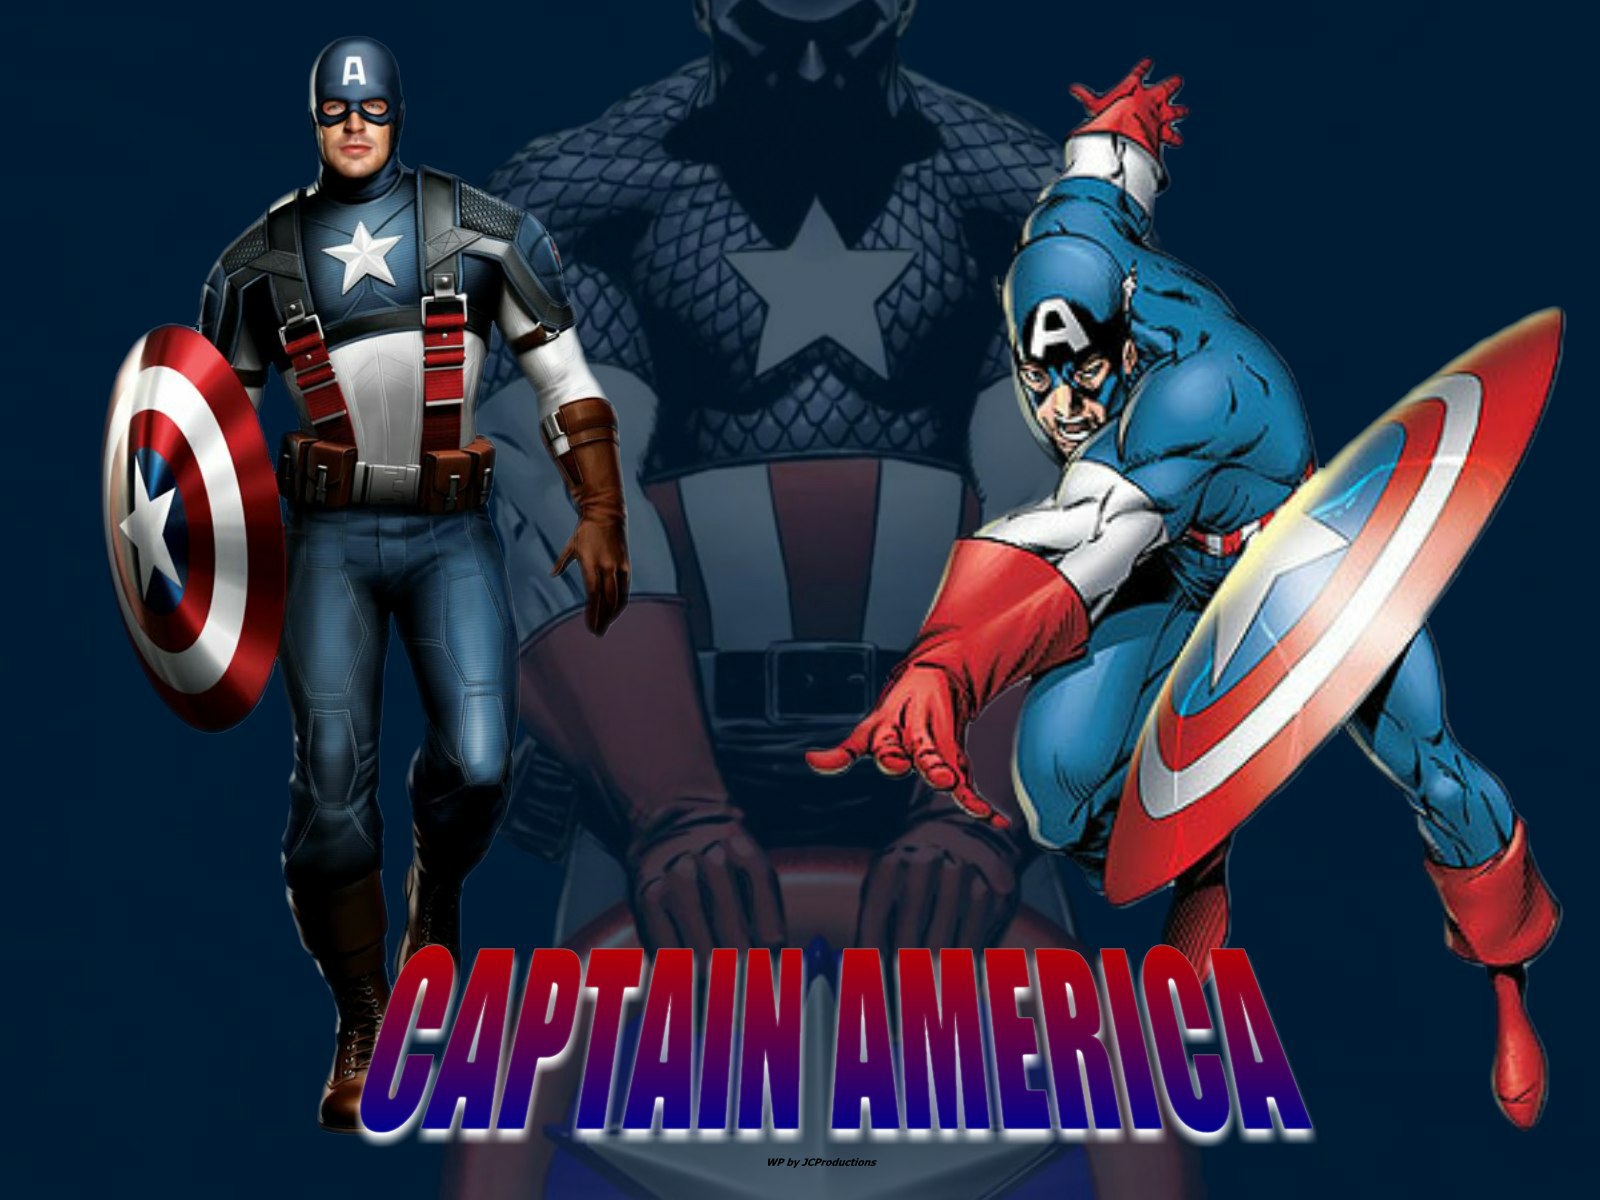 Download High quality Captain America wallpaper / Movies / 1600x1200